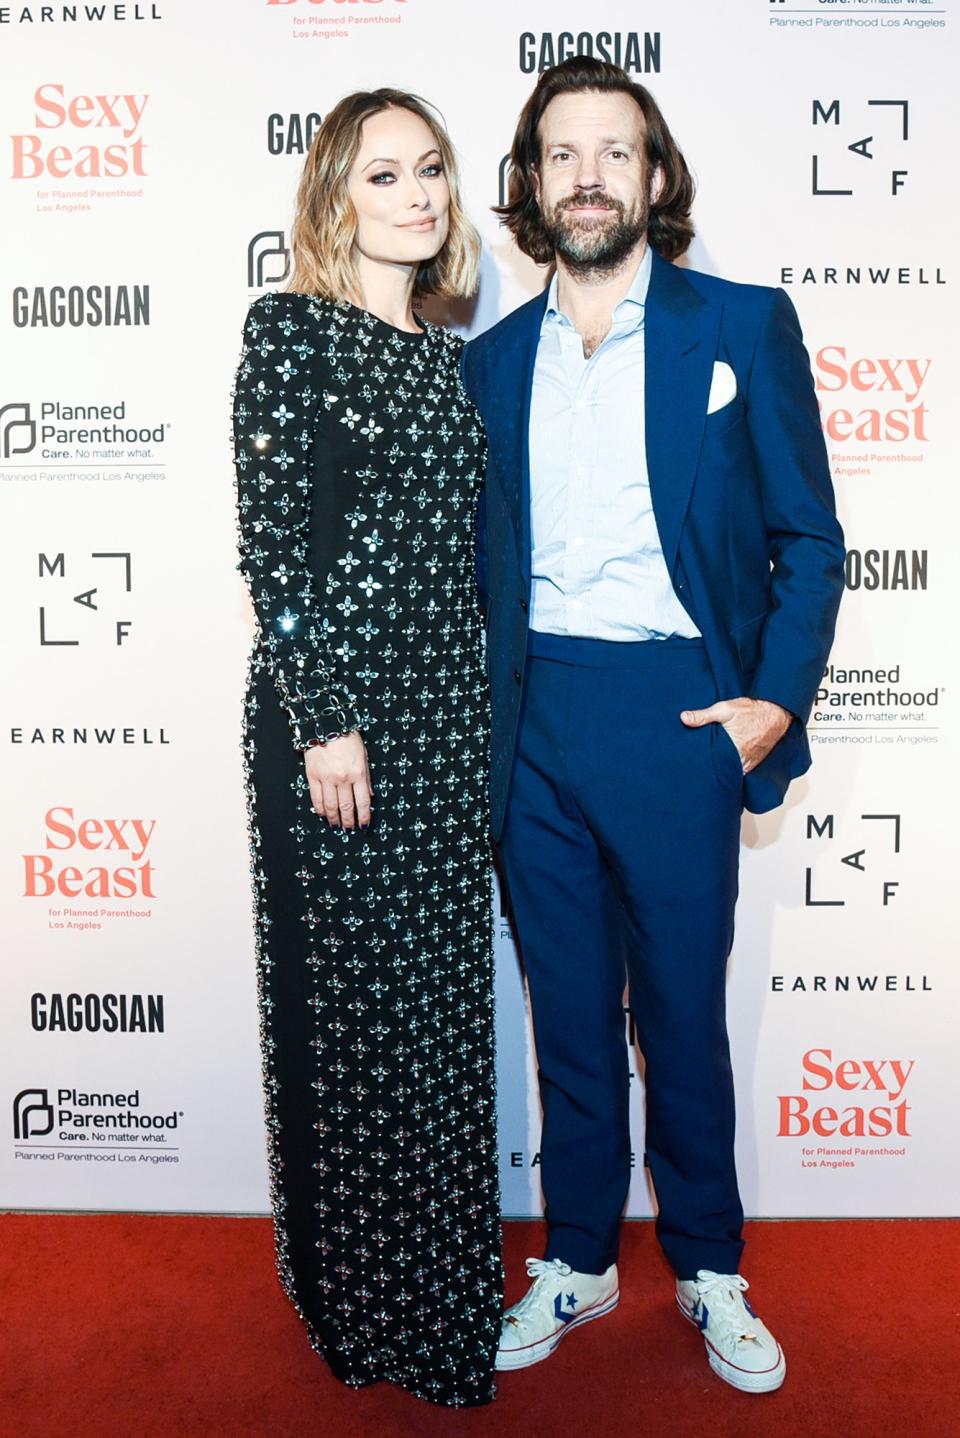 Stars and art aficionados attended Sexy Beast’s Gala at the Marciano Art Foundation for an evening of art, performances, food, and drinks benefiting Planned Parenthood in Los Angeles.